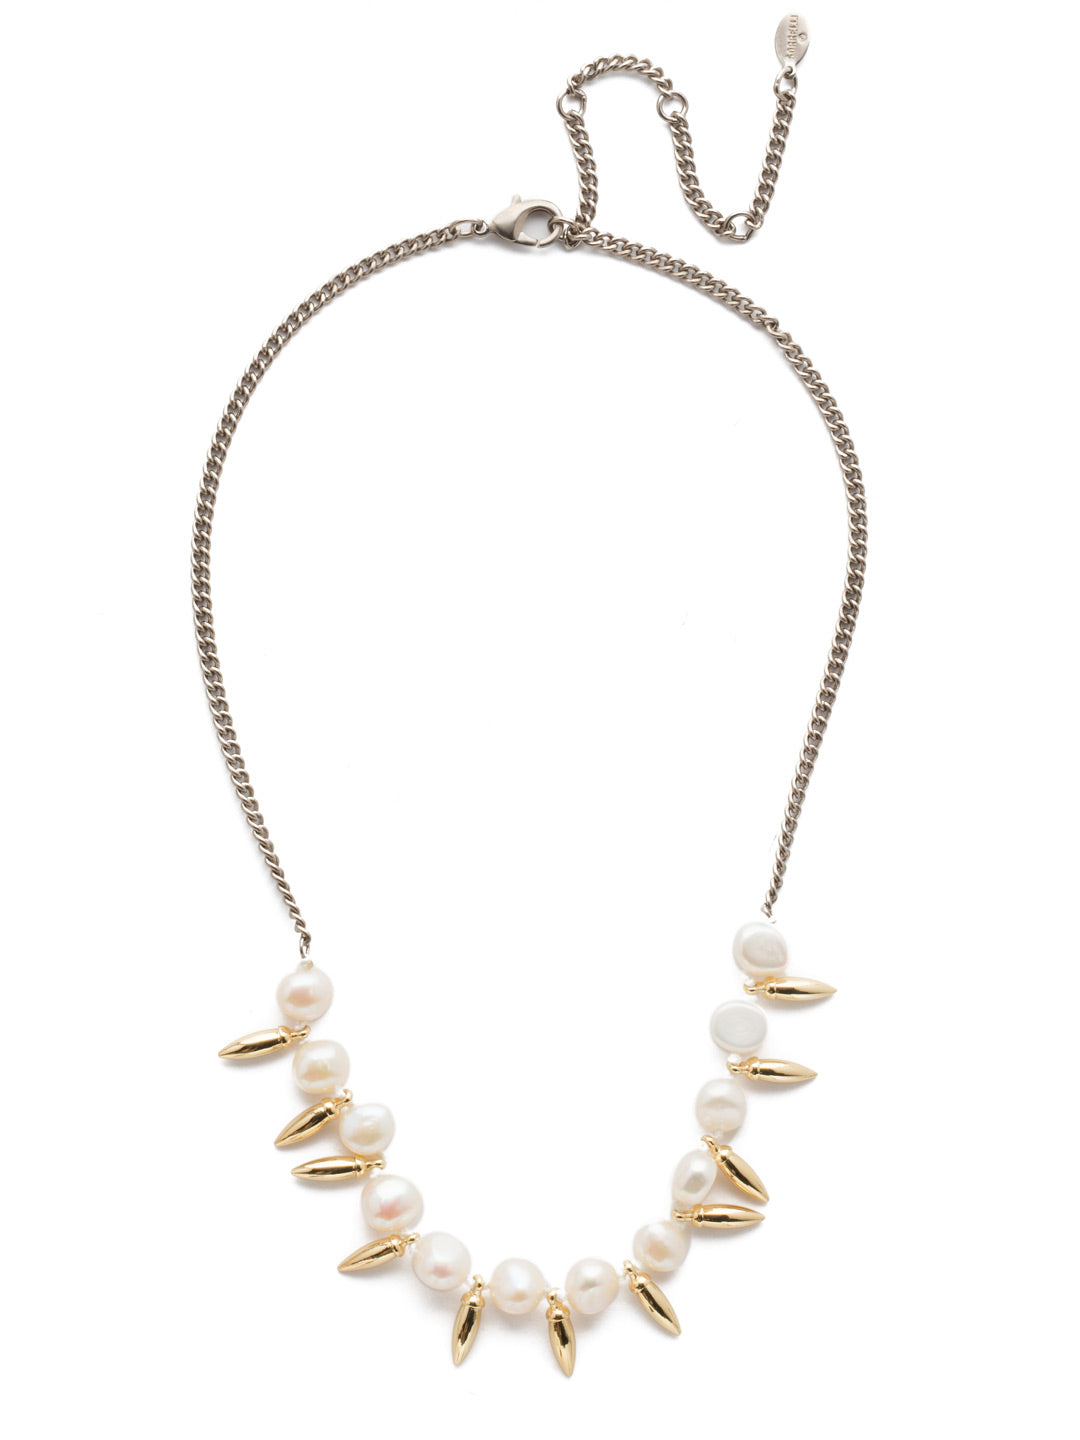 Neptune Classic Necklace - 4NEF18MXMDP - <p>An ode to the sea, beads of pearls and metallic drops join on this adjustable strand, taking everyday wear and specialty occasion outfits up a notch. From Sorrelli's Modern Pearl collection in our Mixed Metal finish.</p>